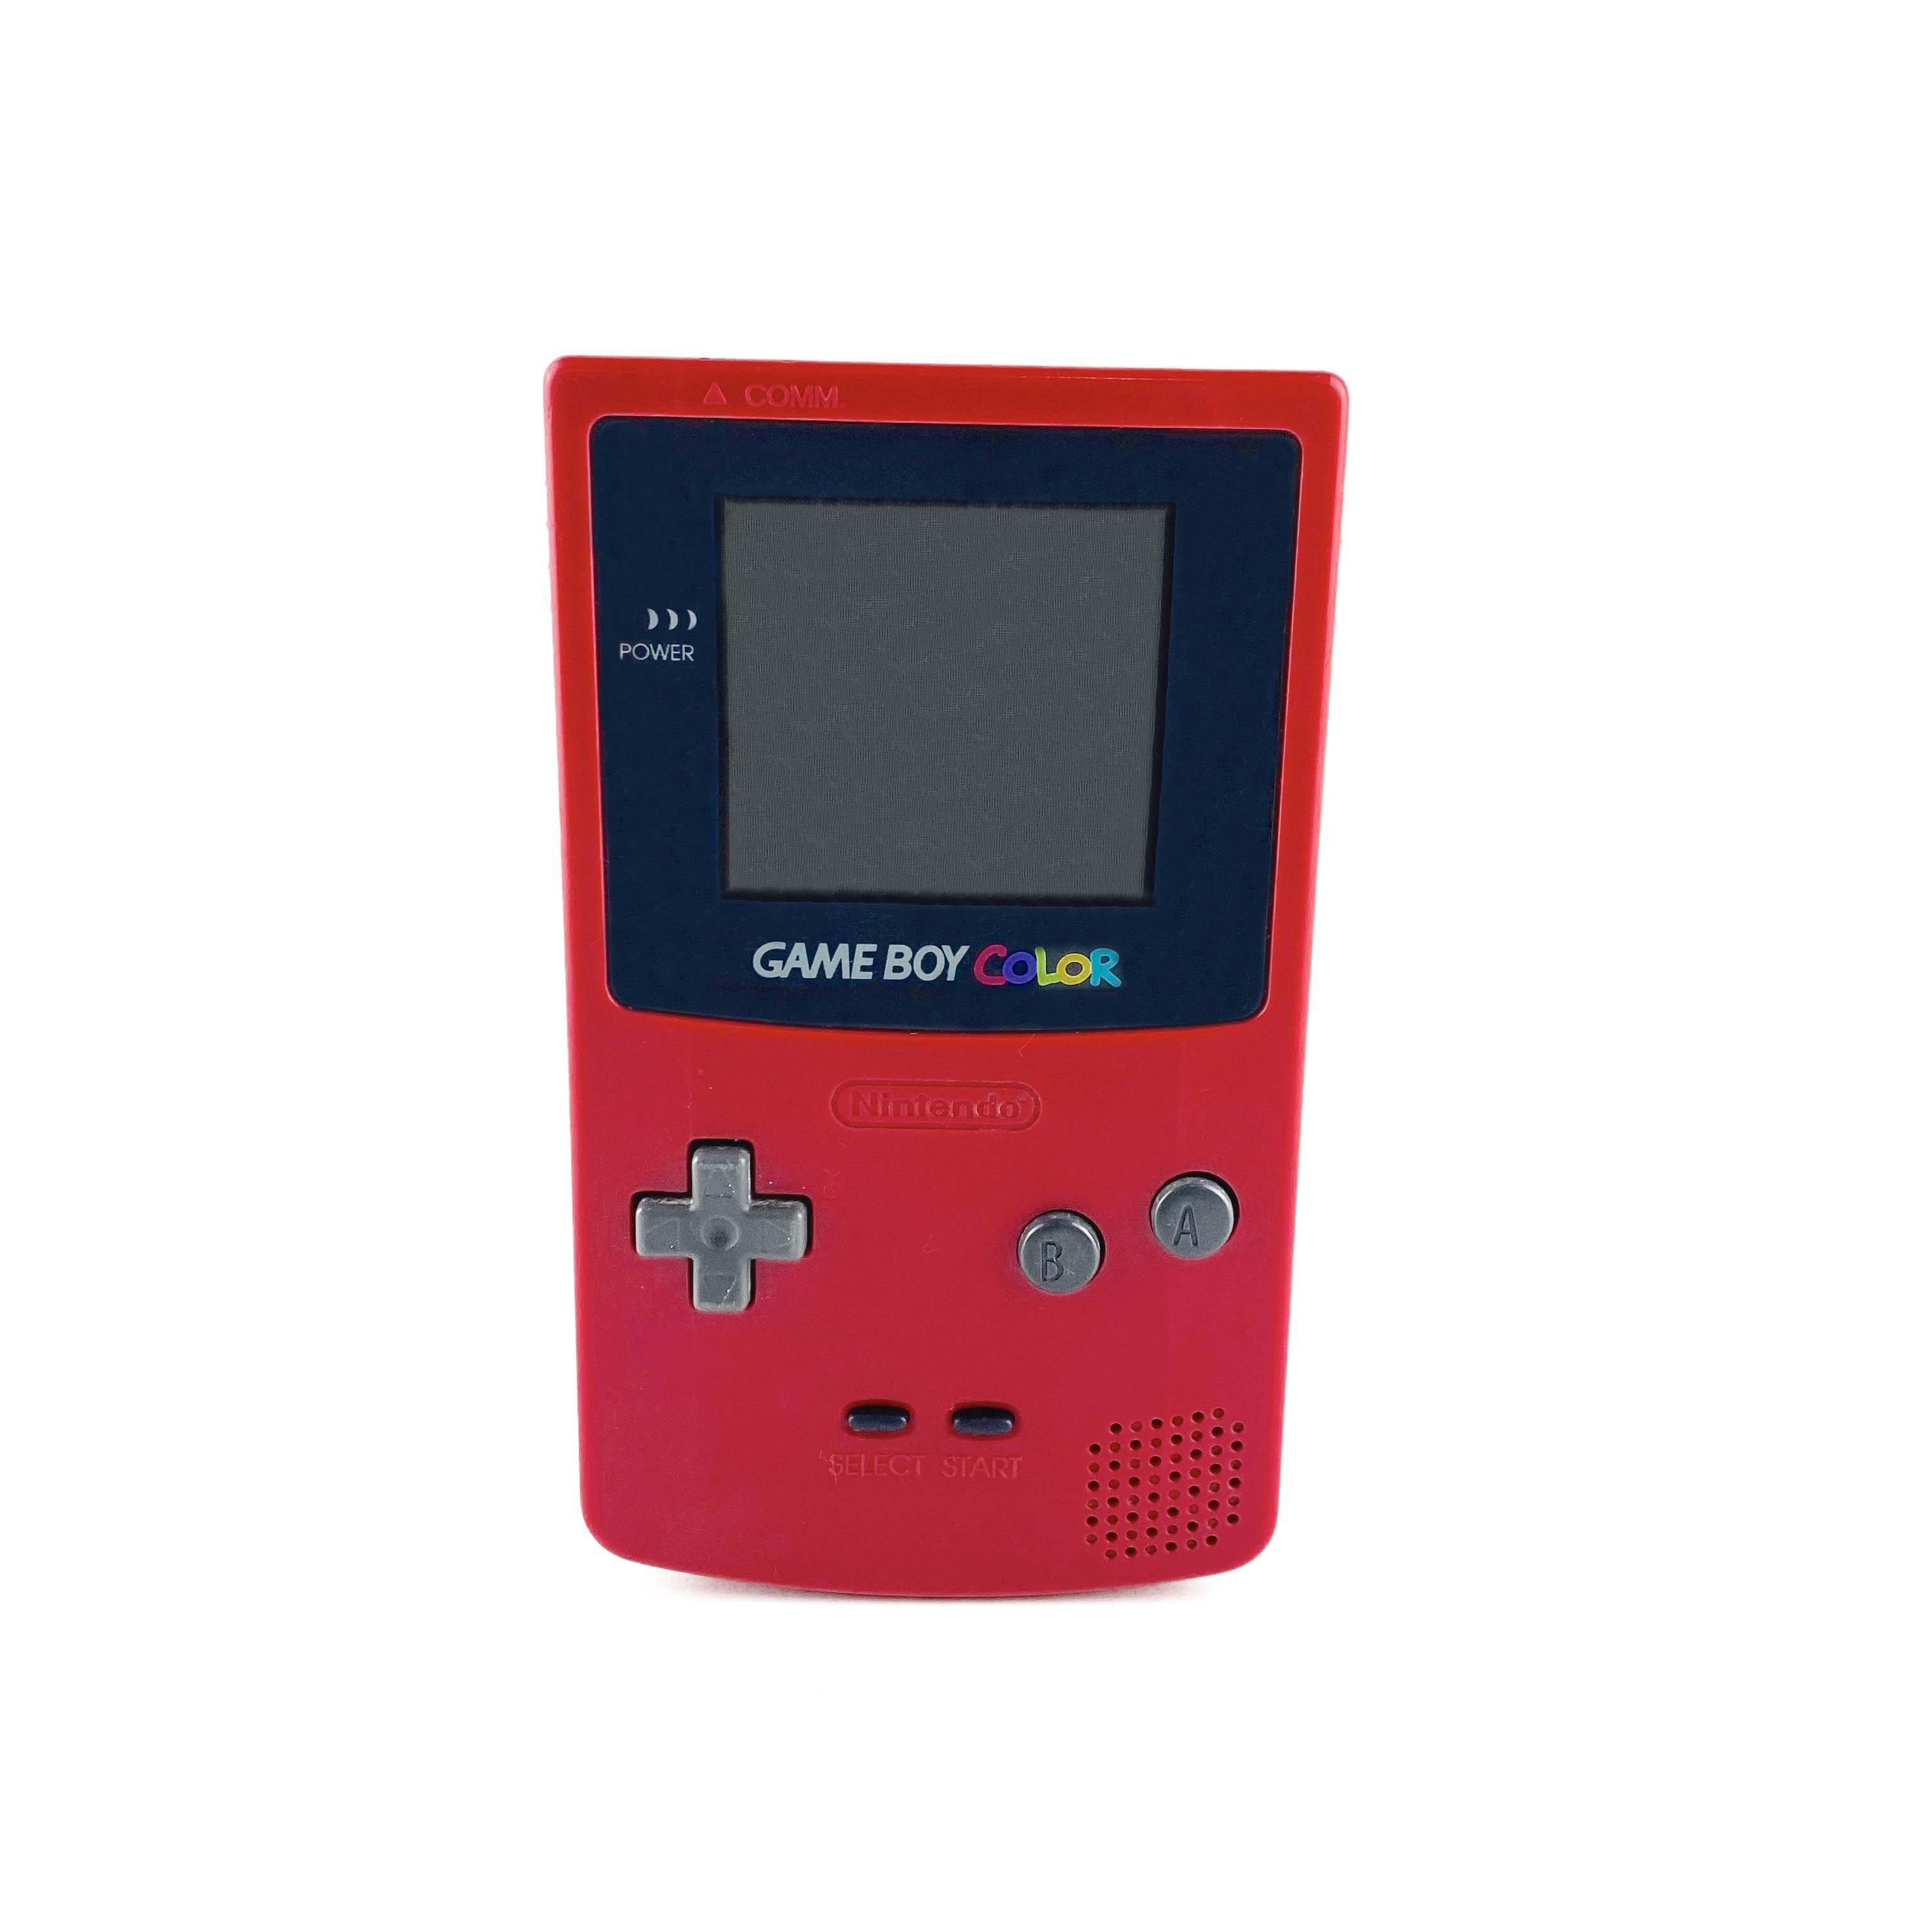 Nintendo Game Boy Color GBC Berry Red Handheld Console (CGB-001)